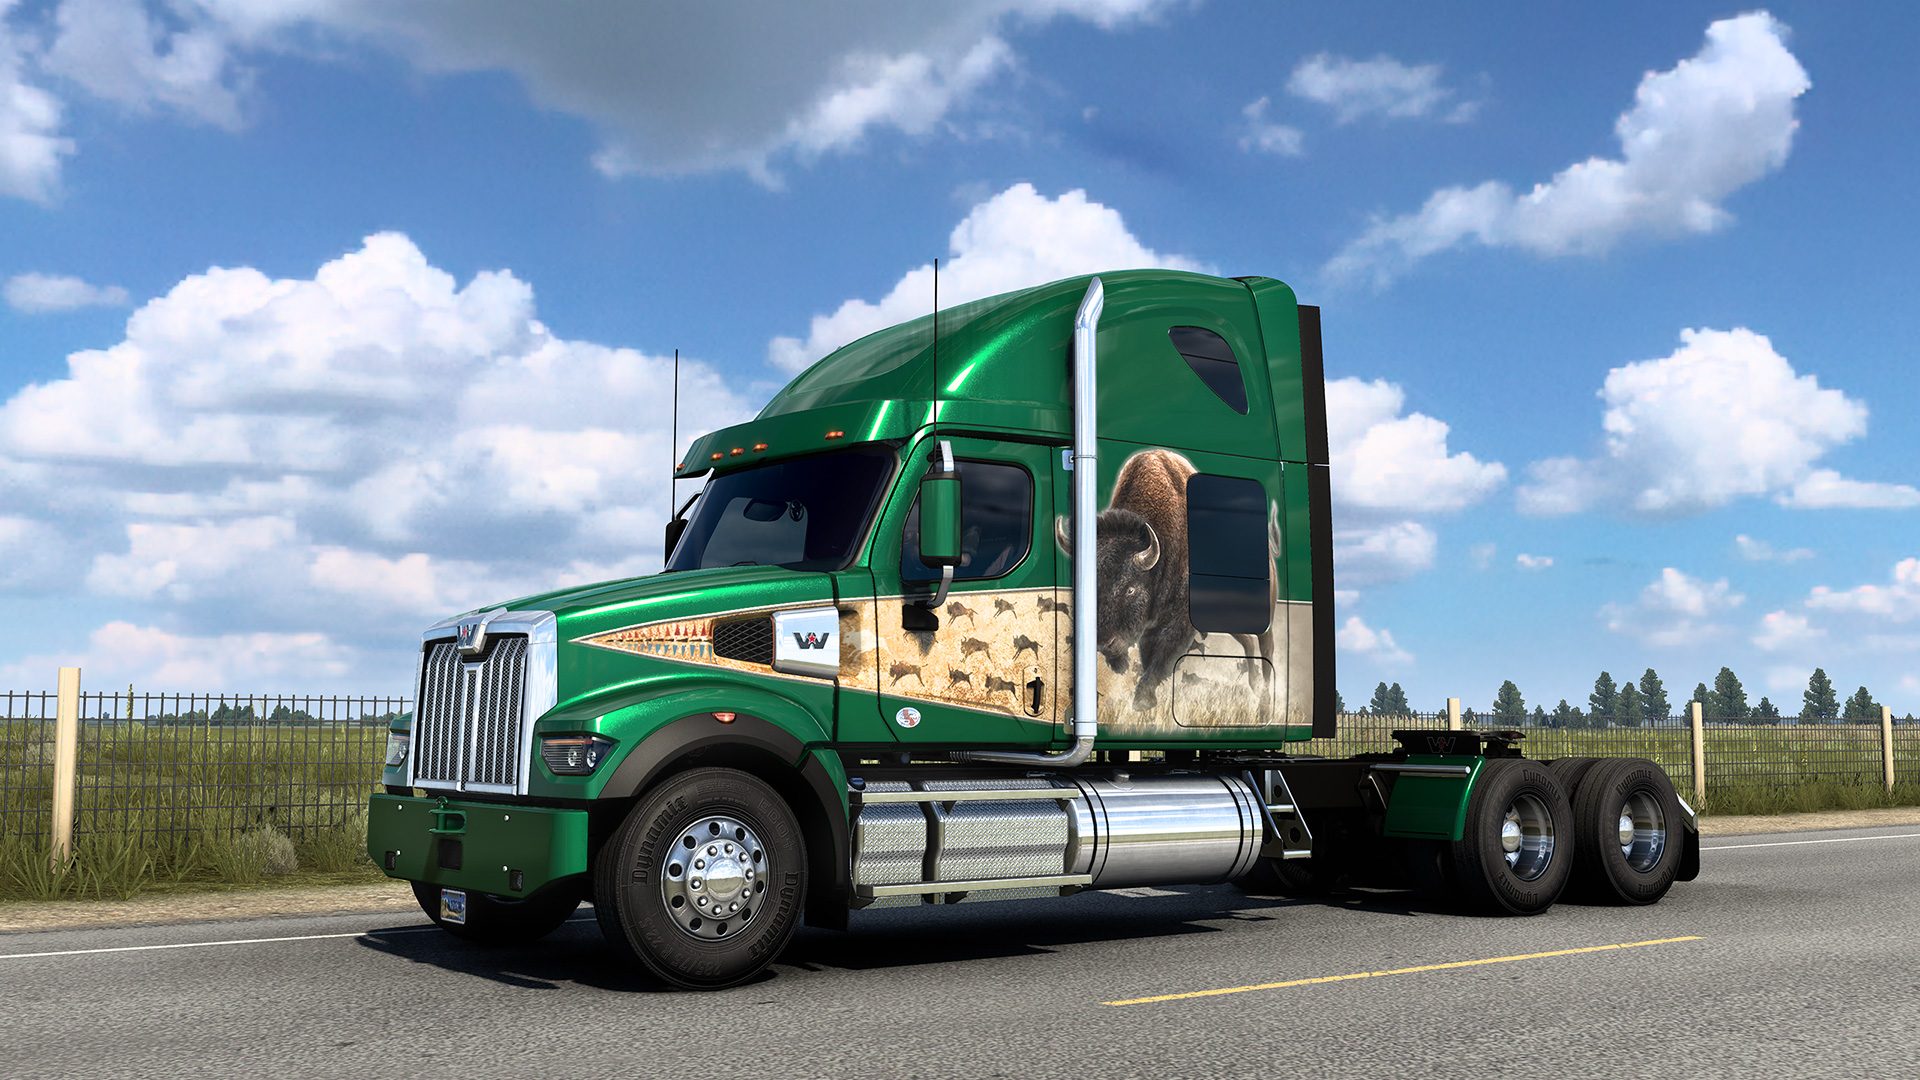 Get a bison truck for playing American Truck Simulator’s Wyoming DLC at launch